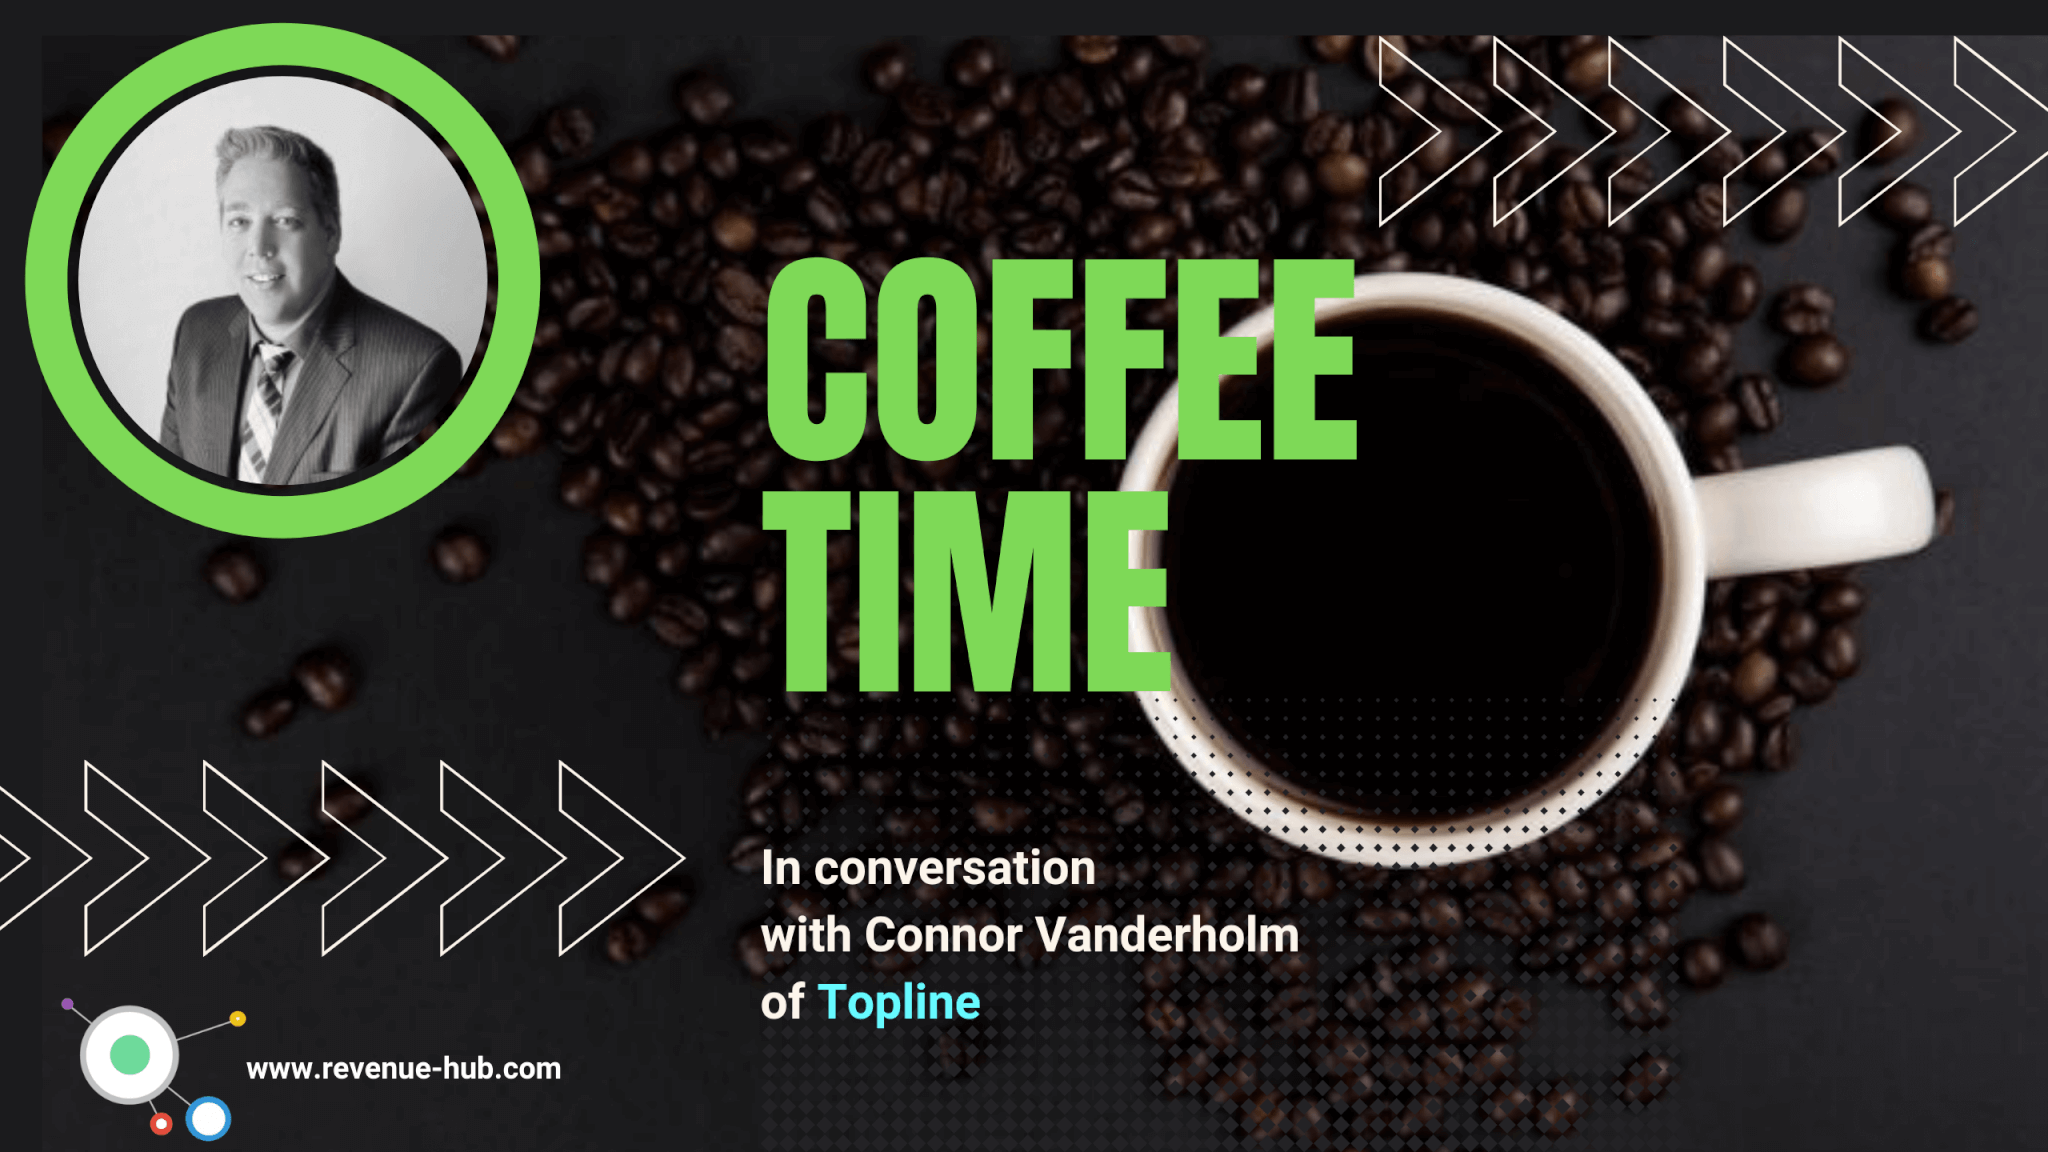 thimbnail image for coffee time discussion with connor vanderholm about starting a revenue management consultancy